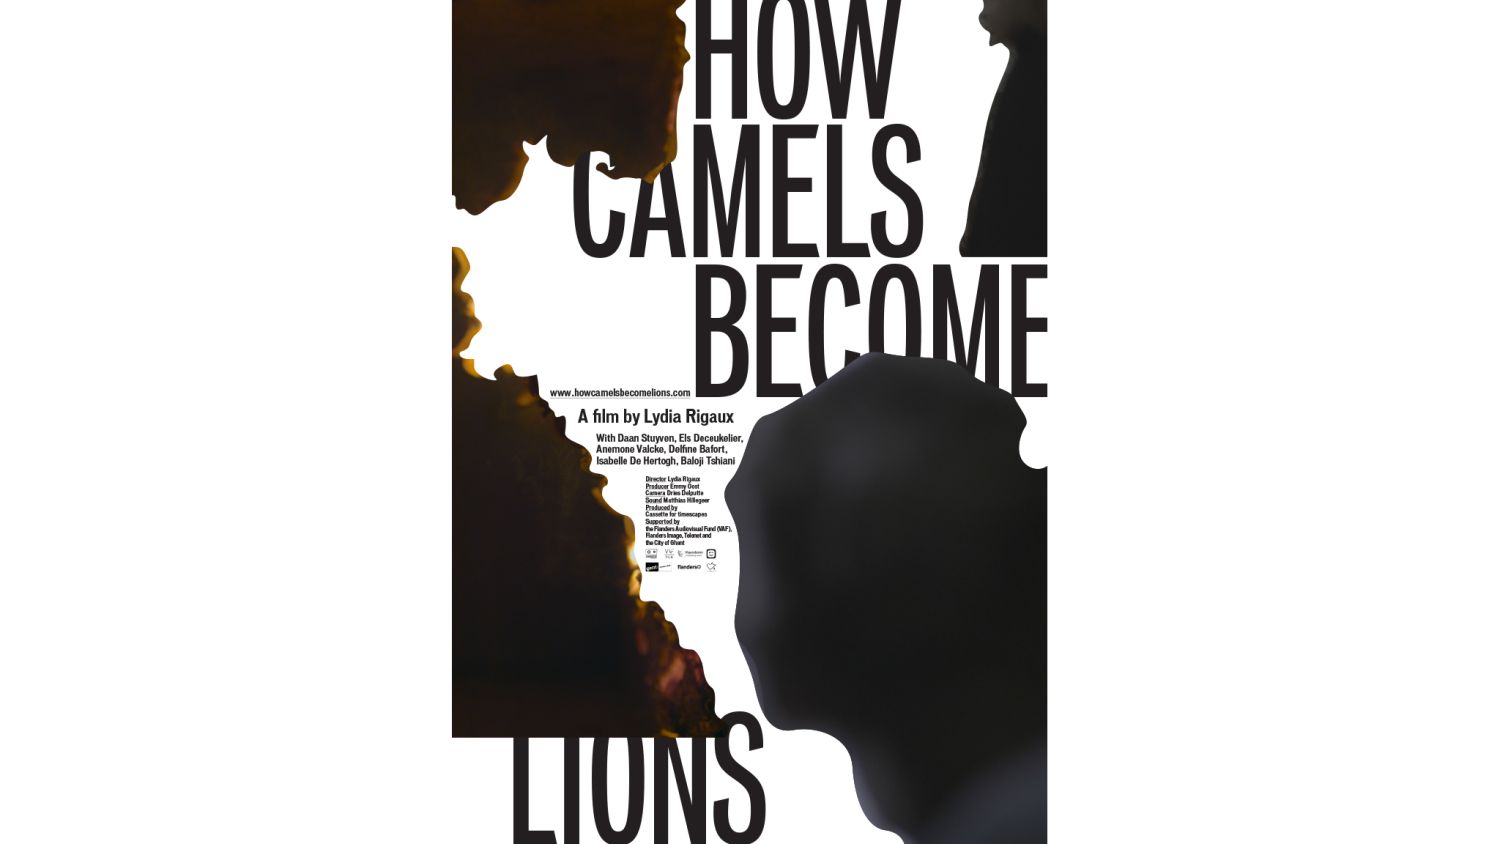 How camels become lions